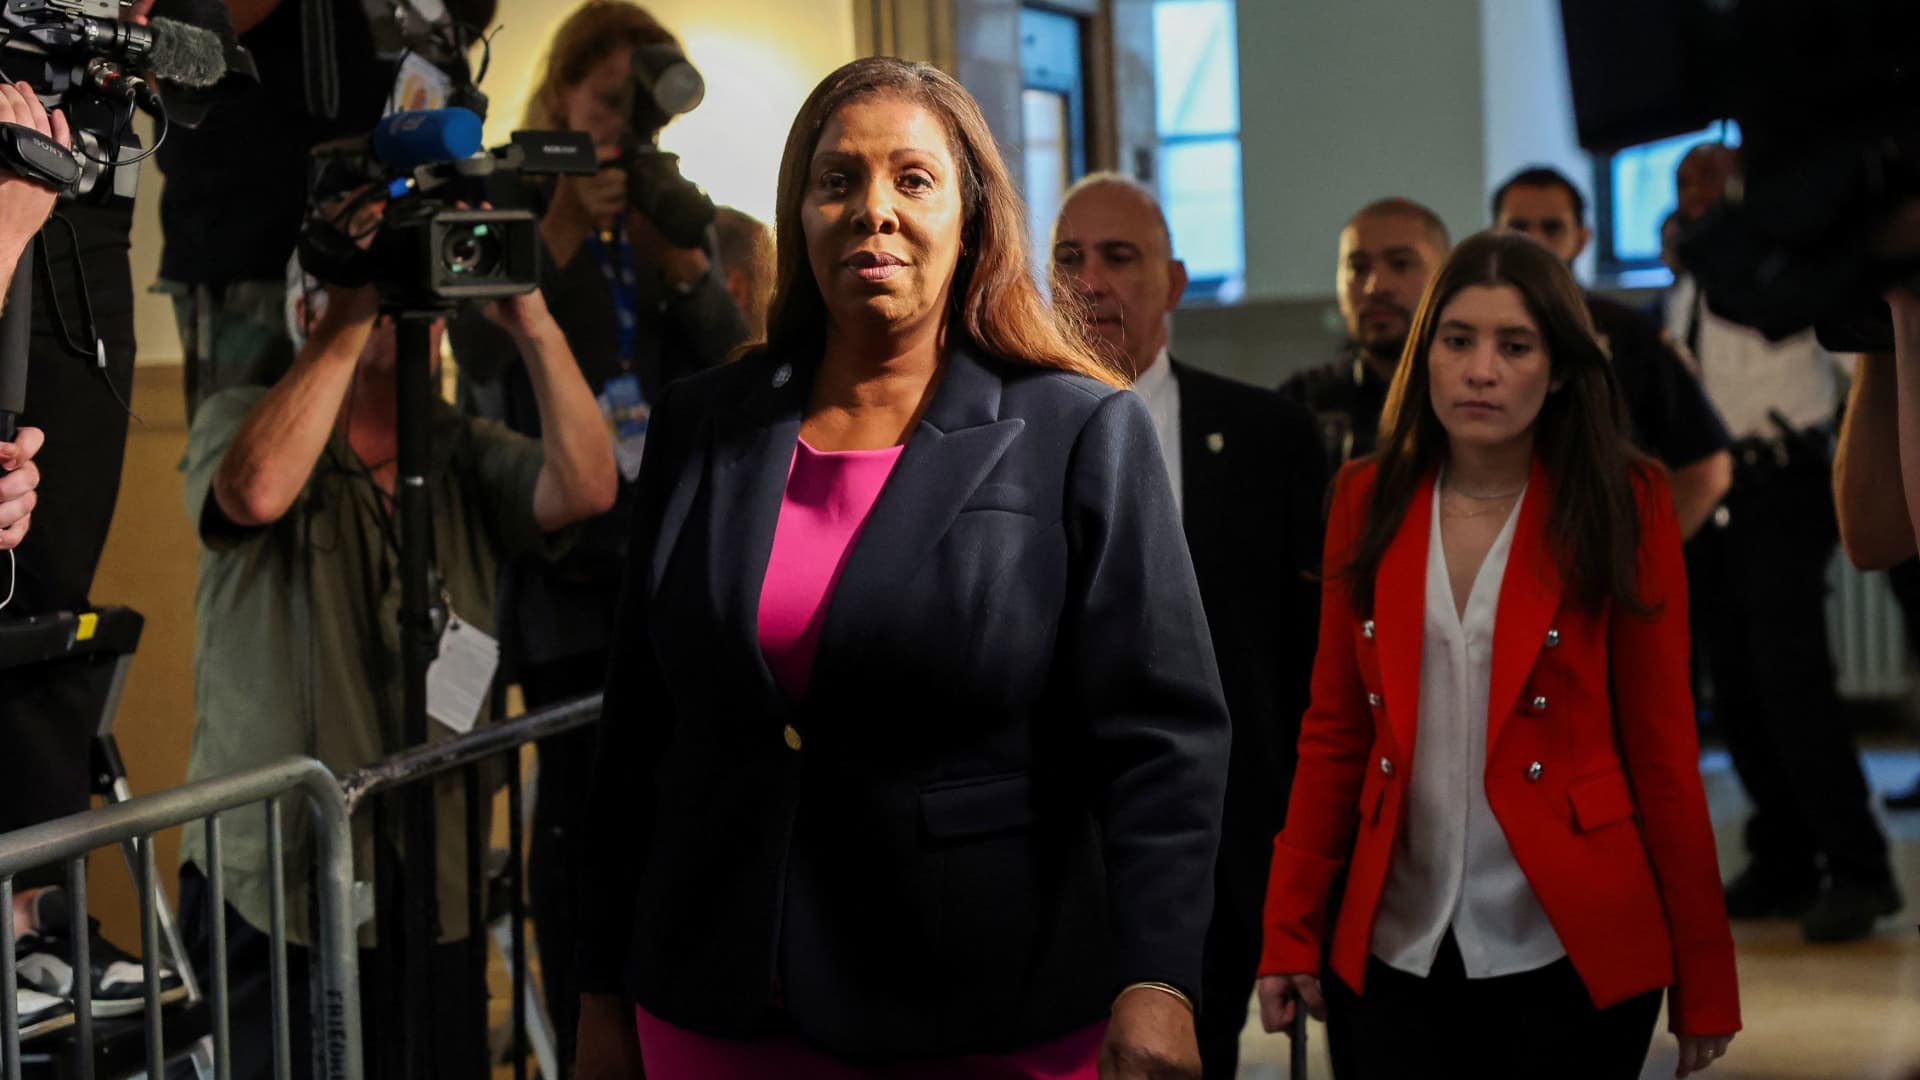 New York Attorney General Letitia James arrives at a Manhattan courthouse trial in a civil fraud case brought by her against Former U.S. President Donald Trump, his adult sons, the Trump Organization and others in New York City, U.S., October 4, 2023. 